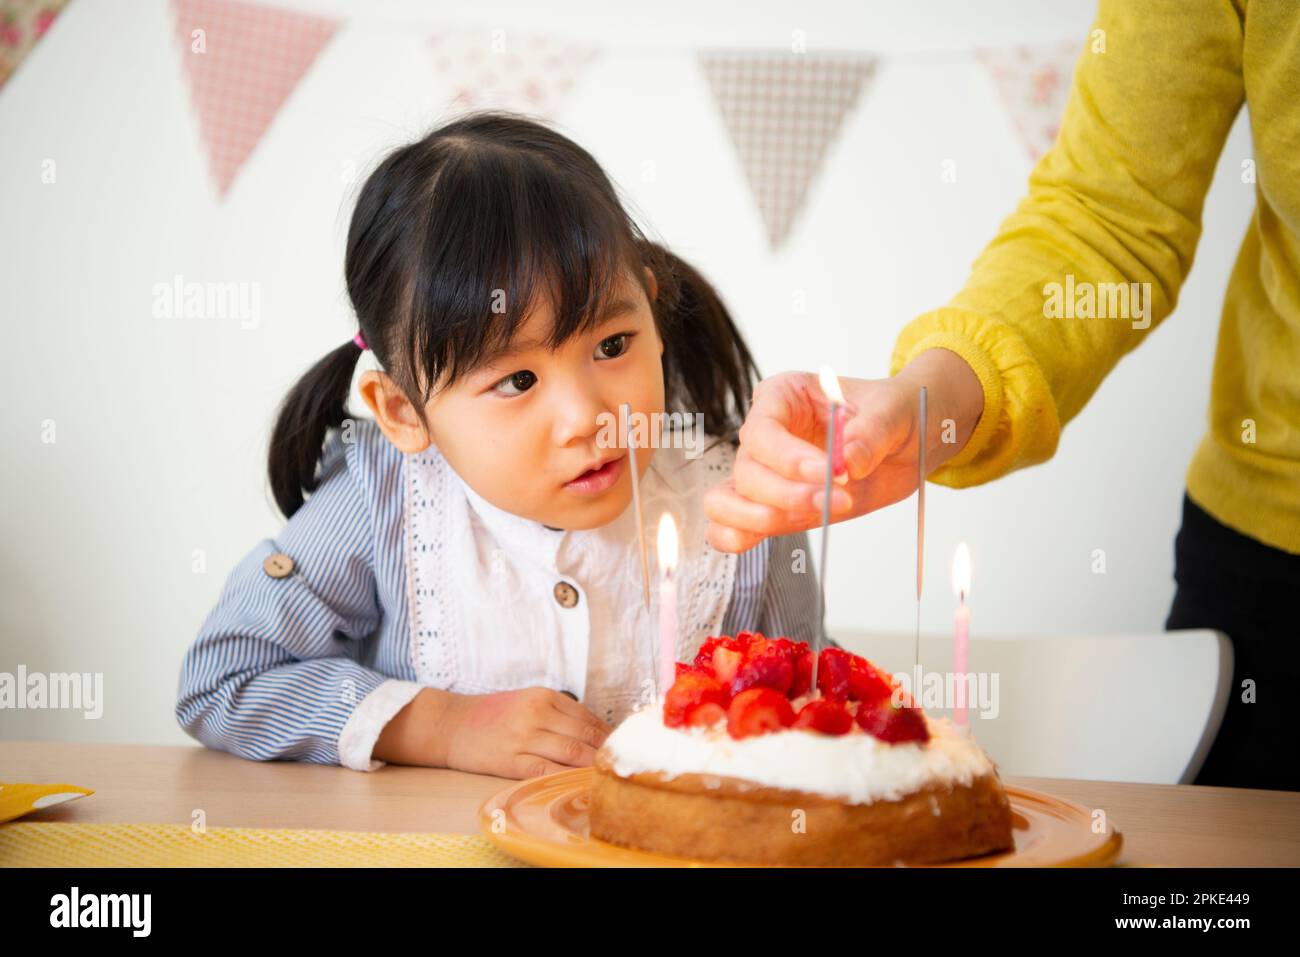 Girl looking at a cake candle Stock Photo